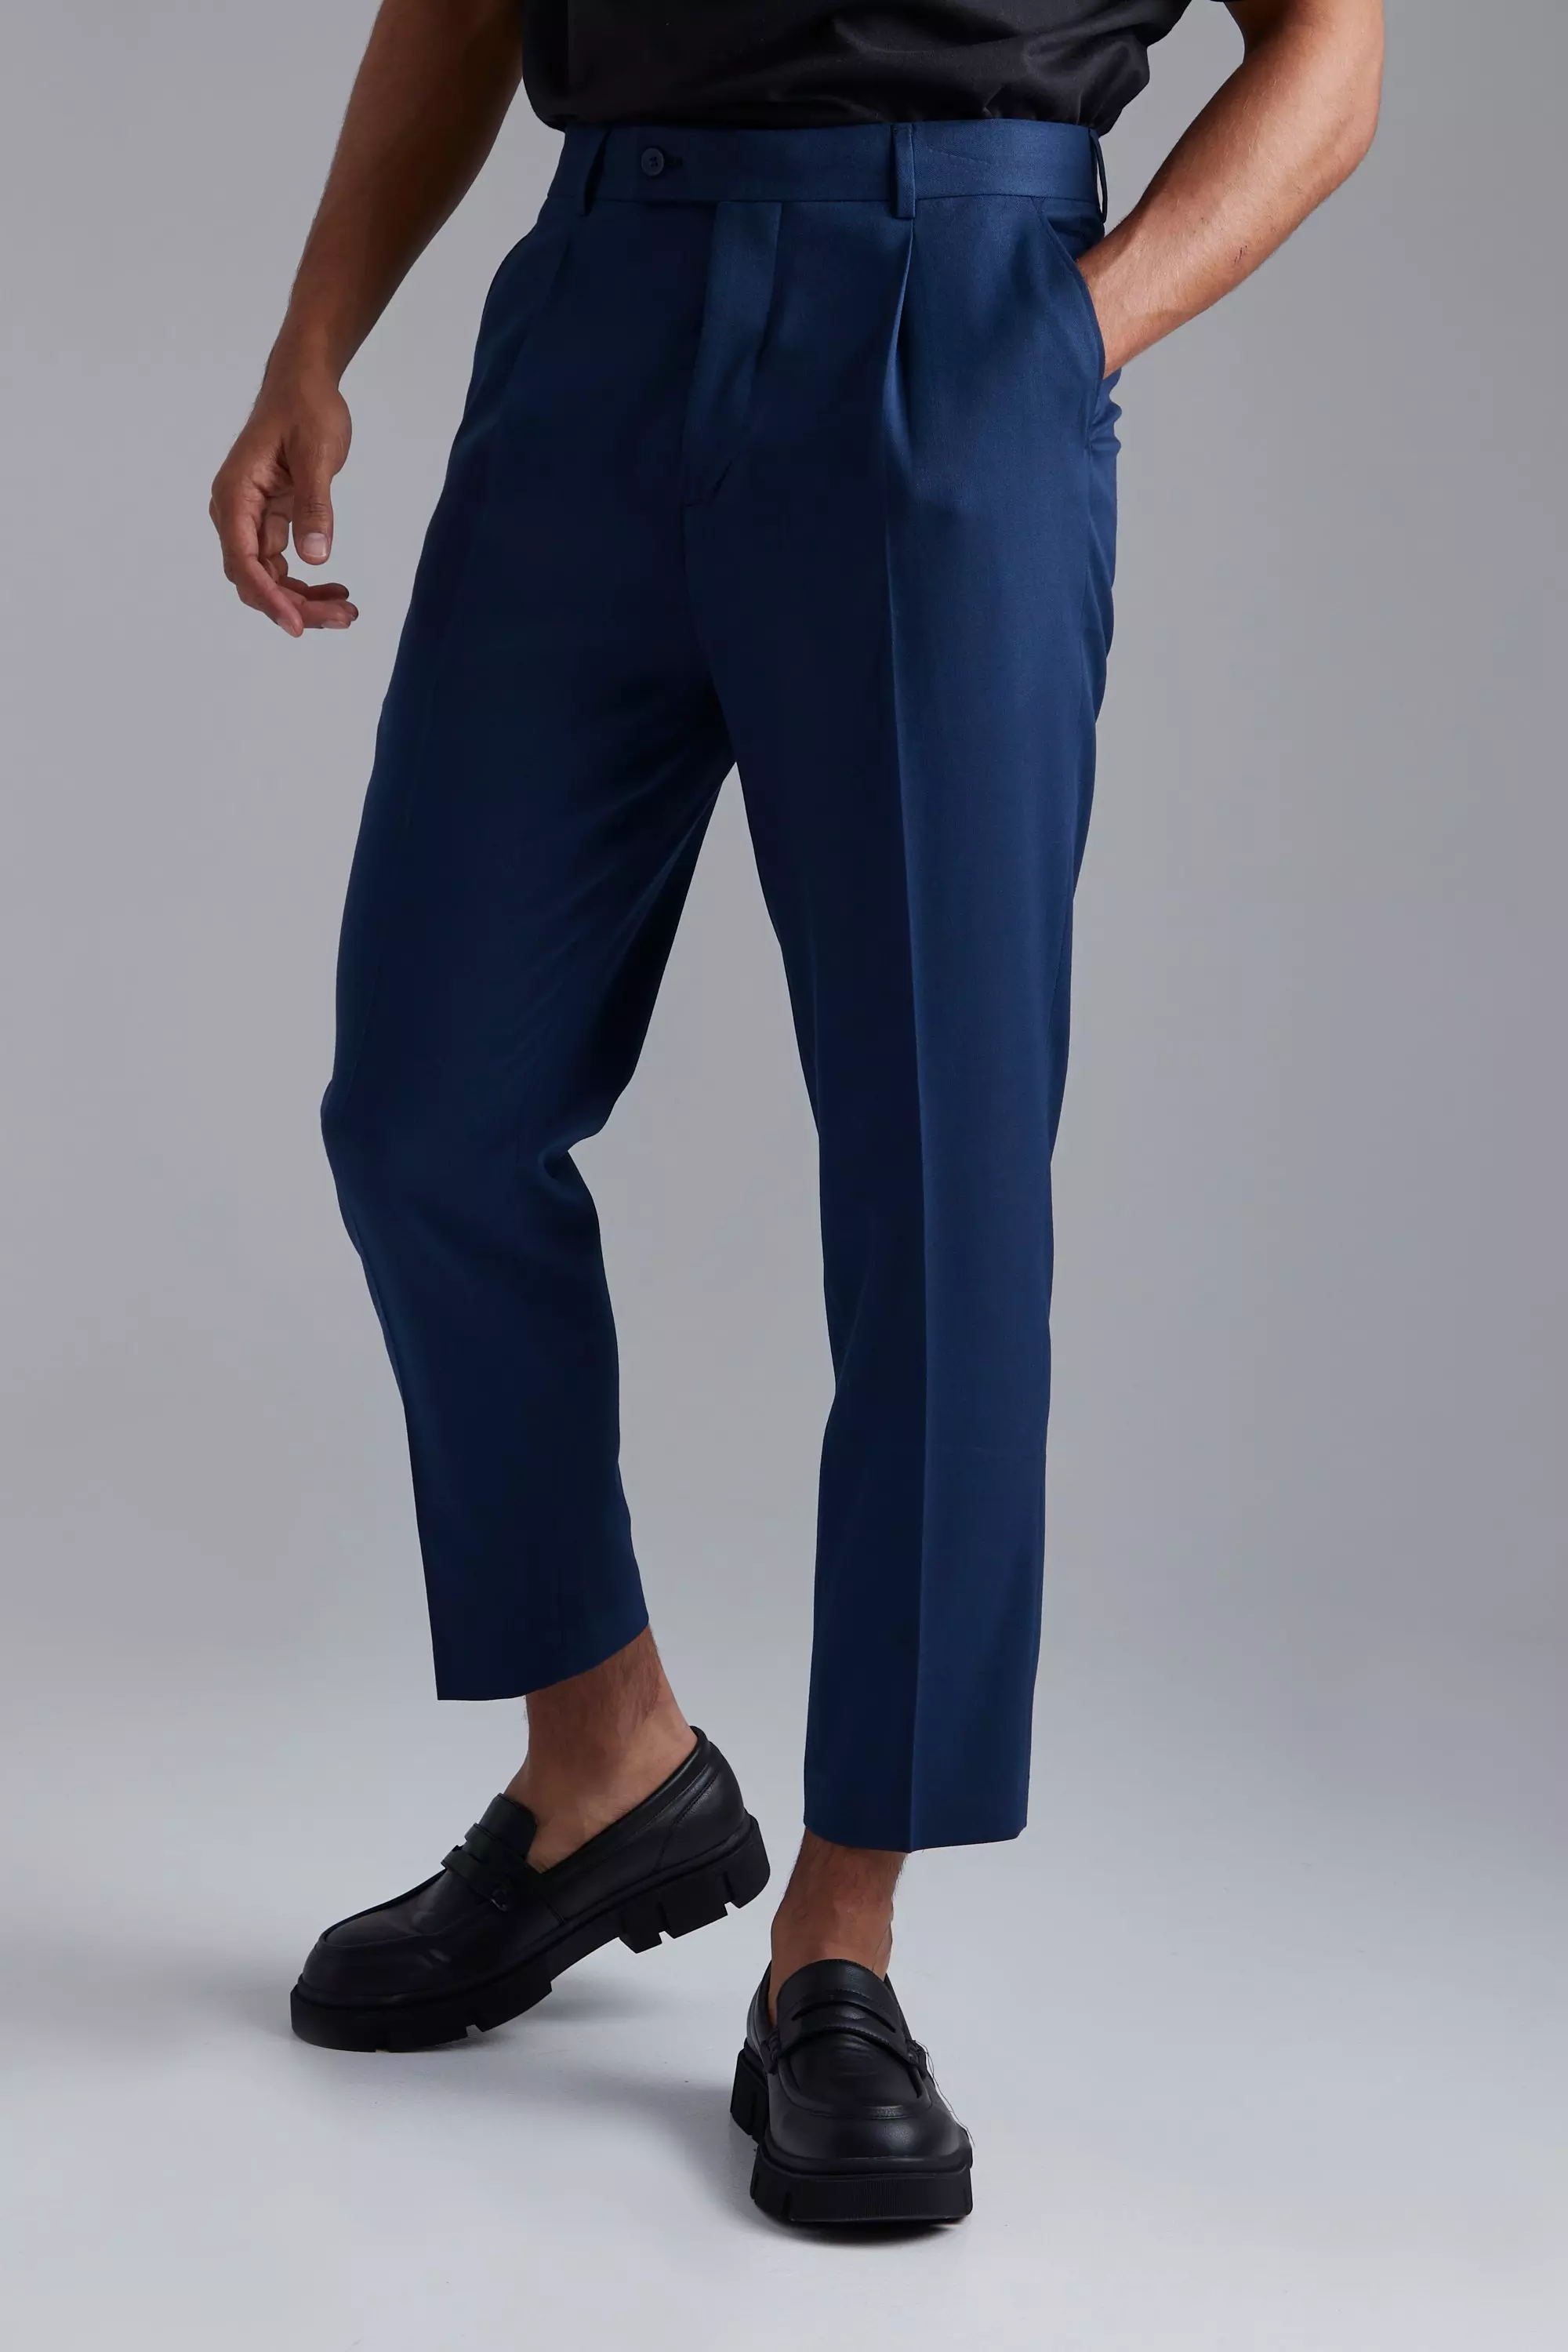 Navy Tapered Comfort Stretch Pants